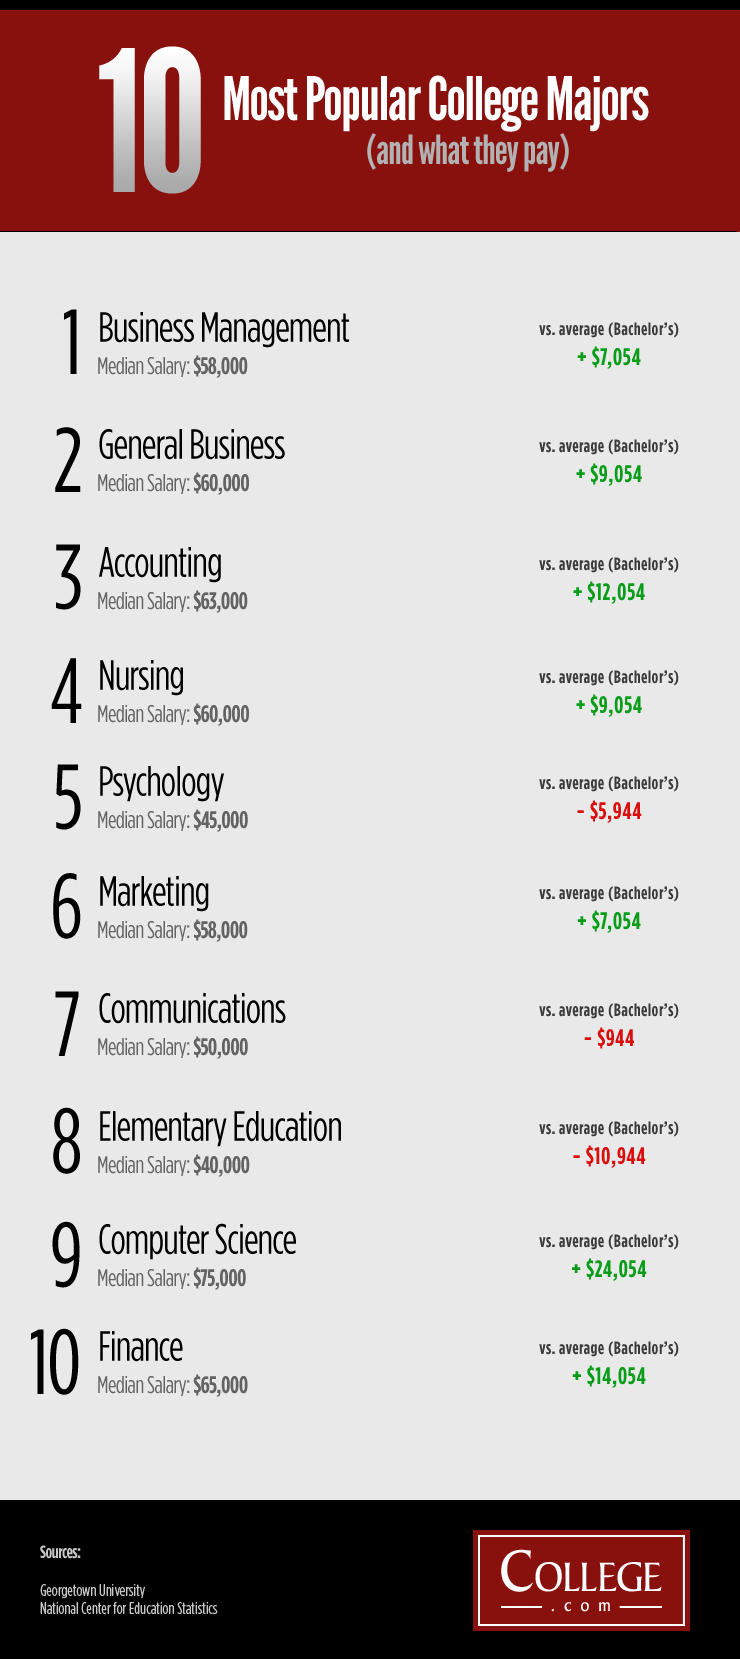 10 Most Popular College Majors (and what they pay) Visual.ly